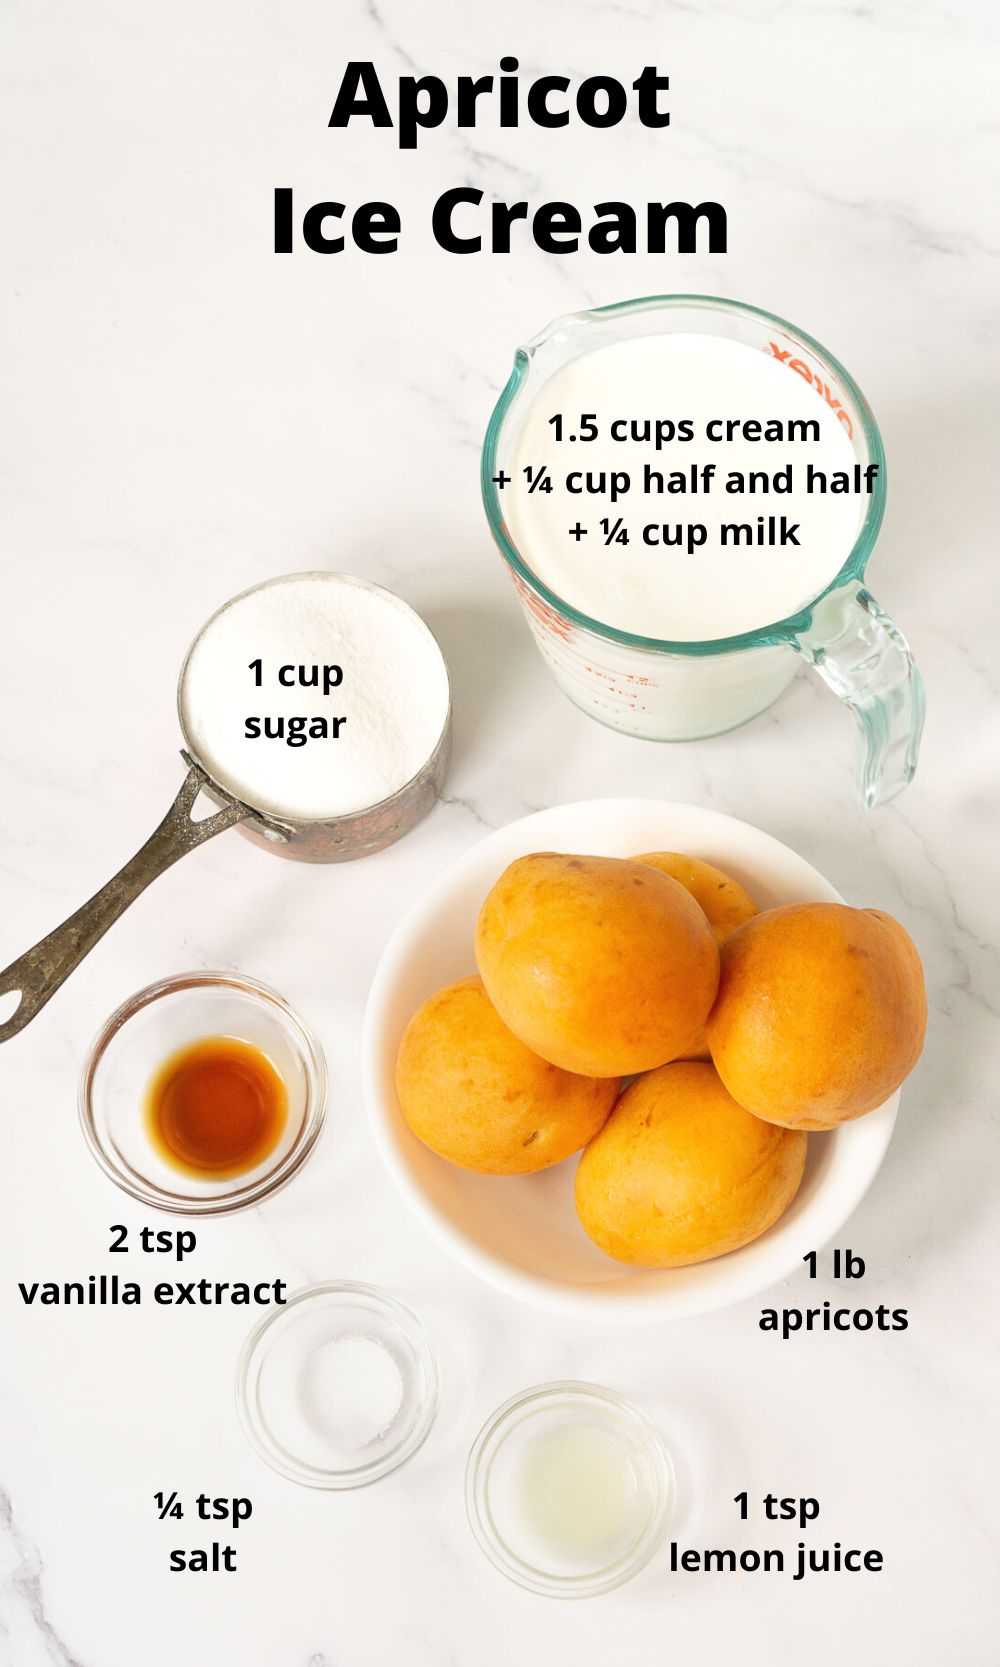 Ingredients for apricot ice cream